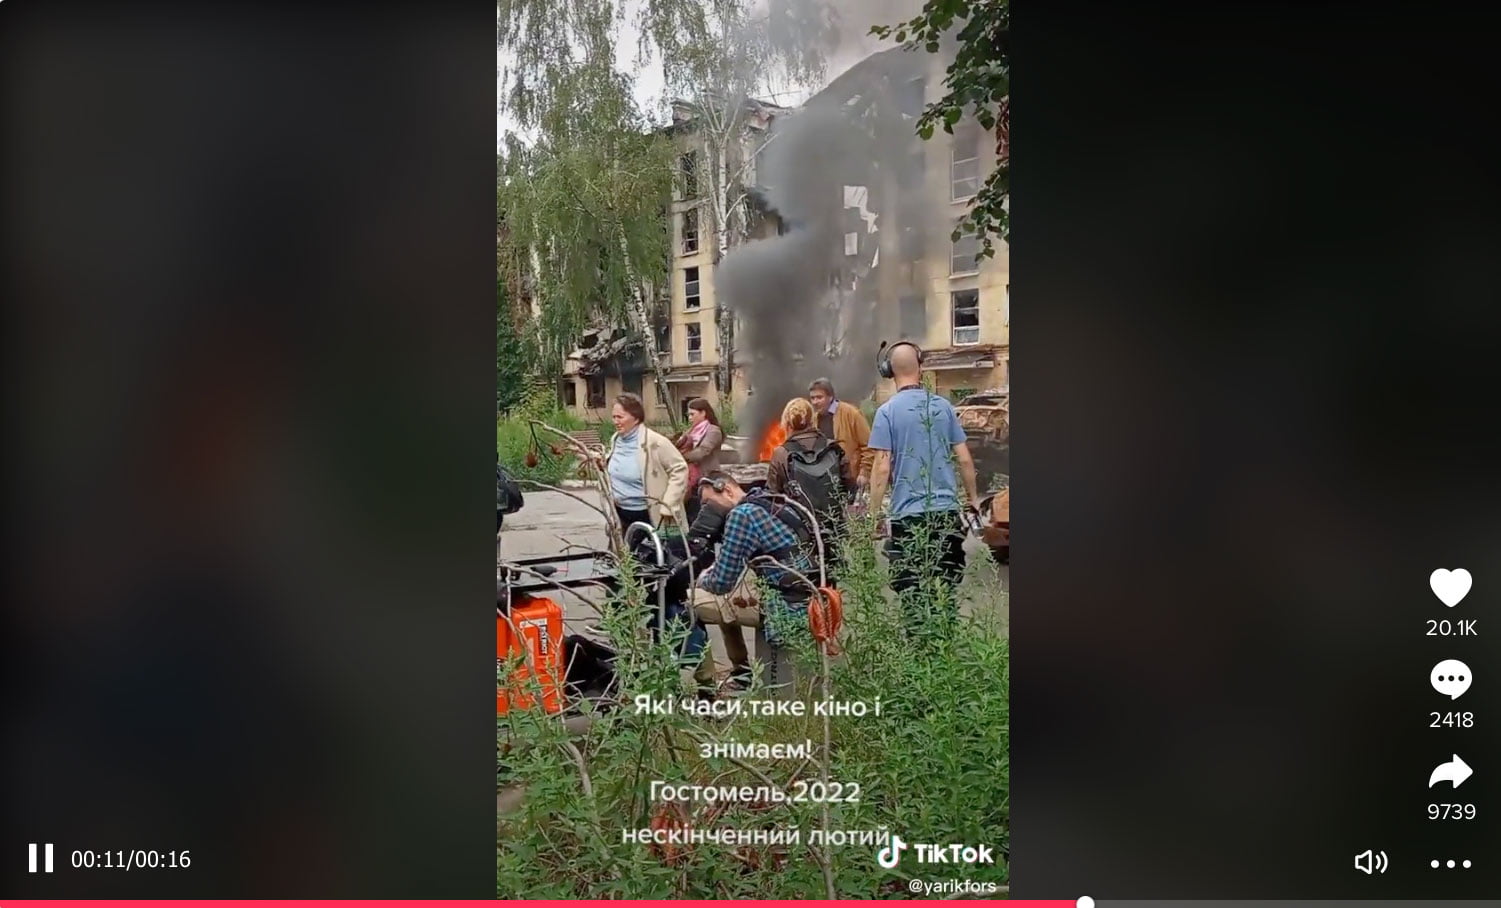 Russian propaganda uses footage from a film set to spread disinformation